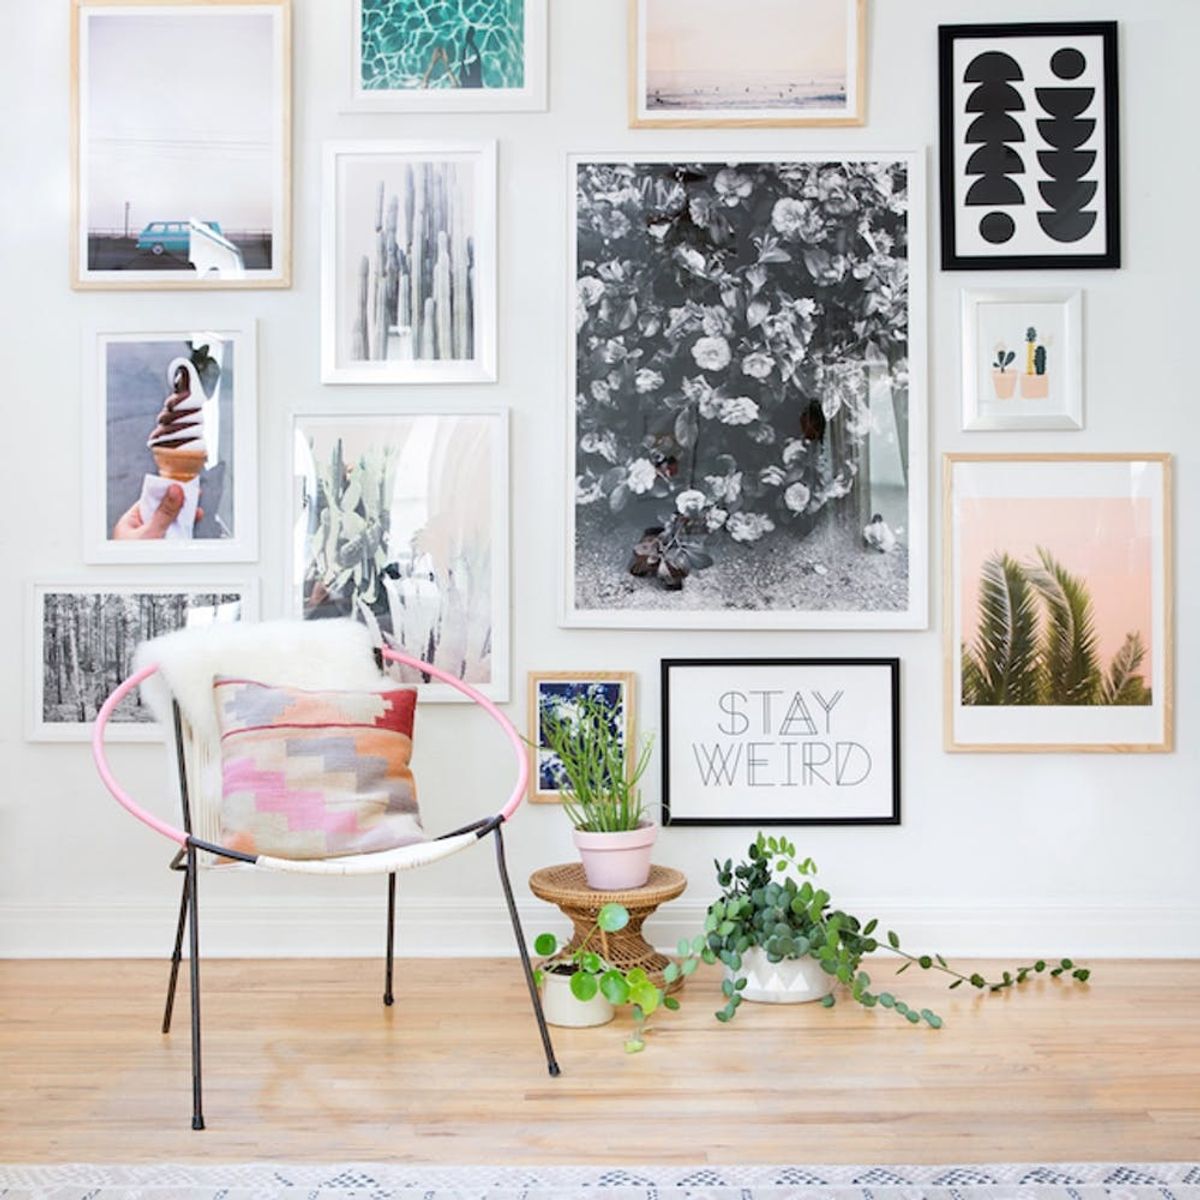 28 Gallery Wall Ideas to Spiff Up Your Space